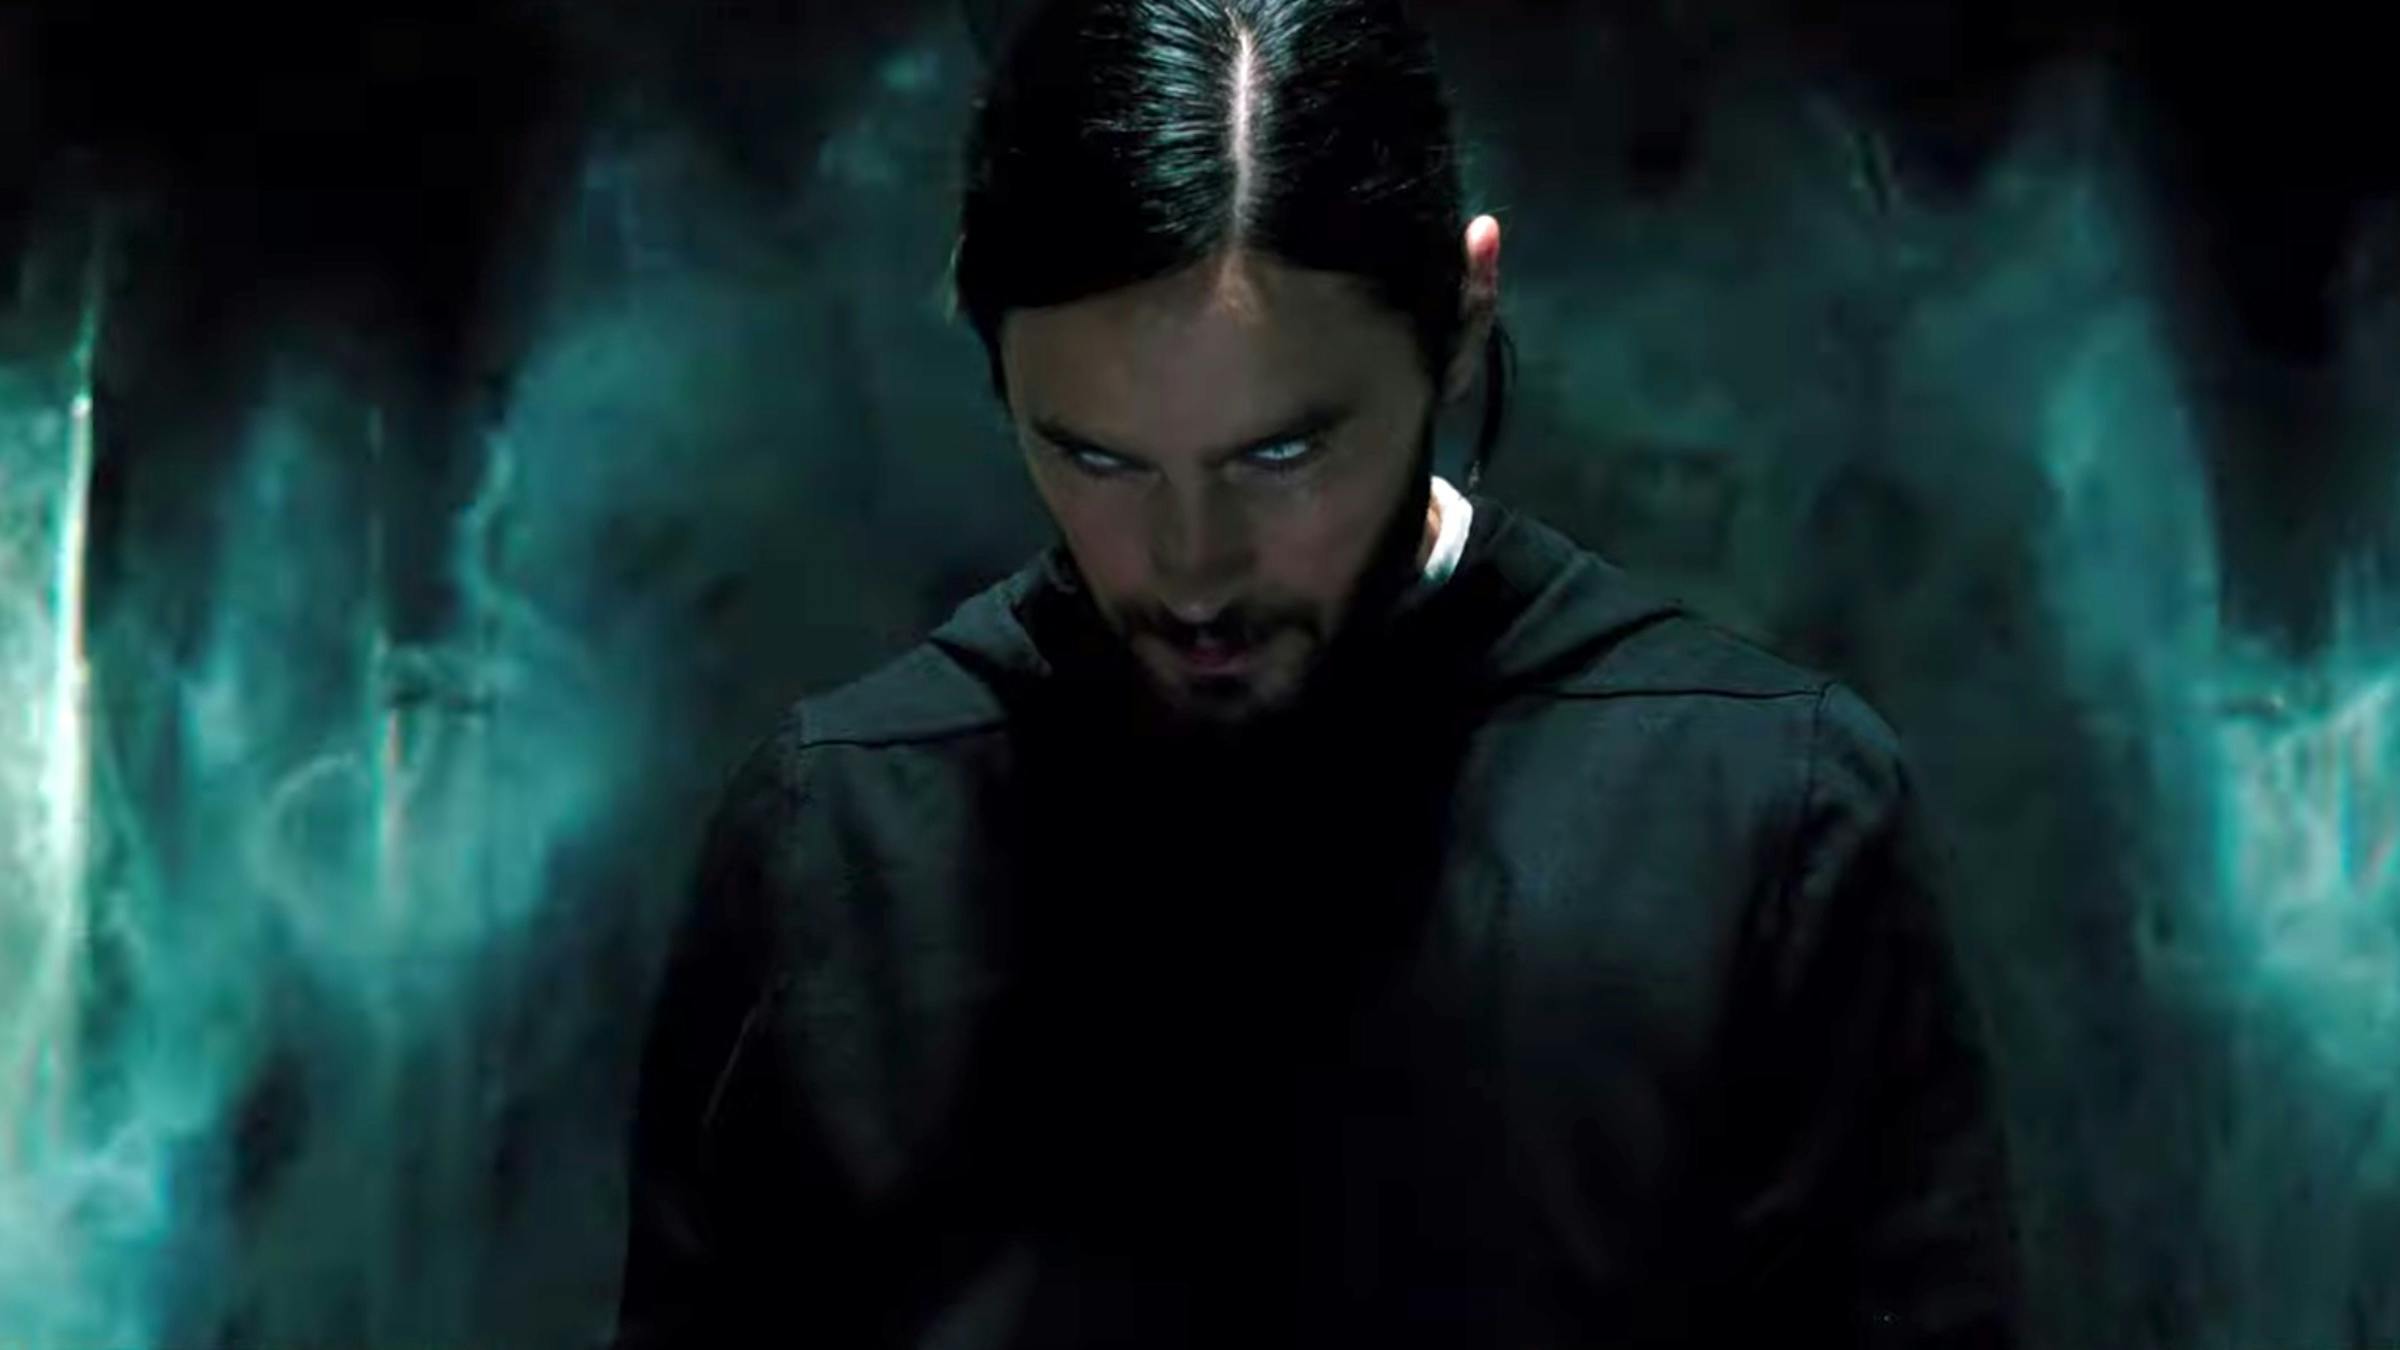 First Trailer For Marvel's Morbius Shows Jared Leto's Vampiric Transformation